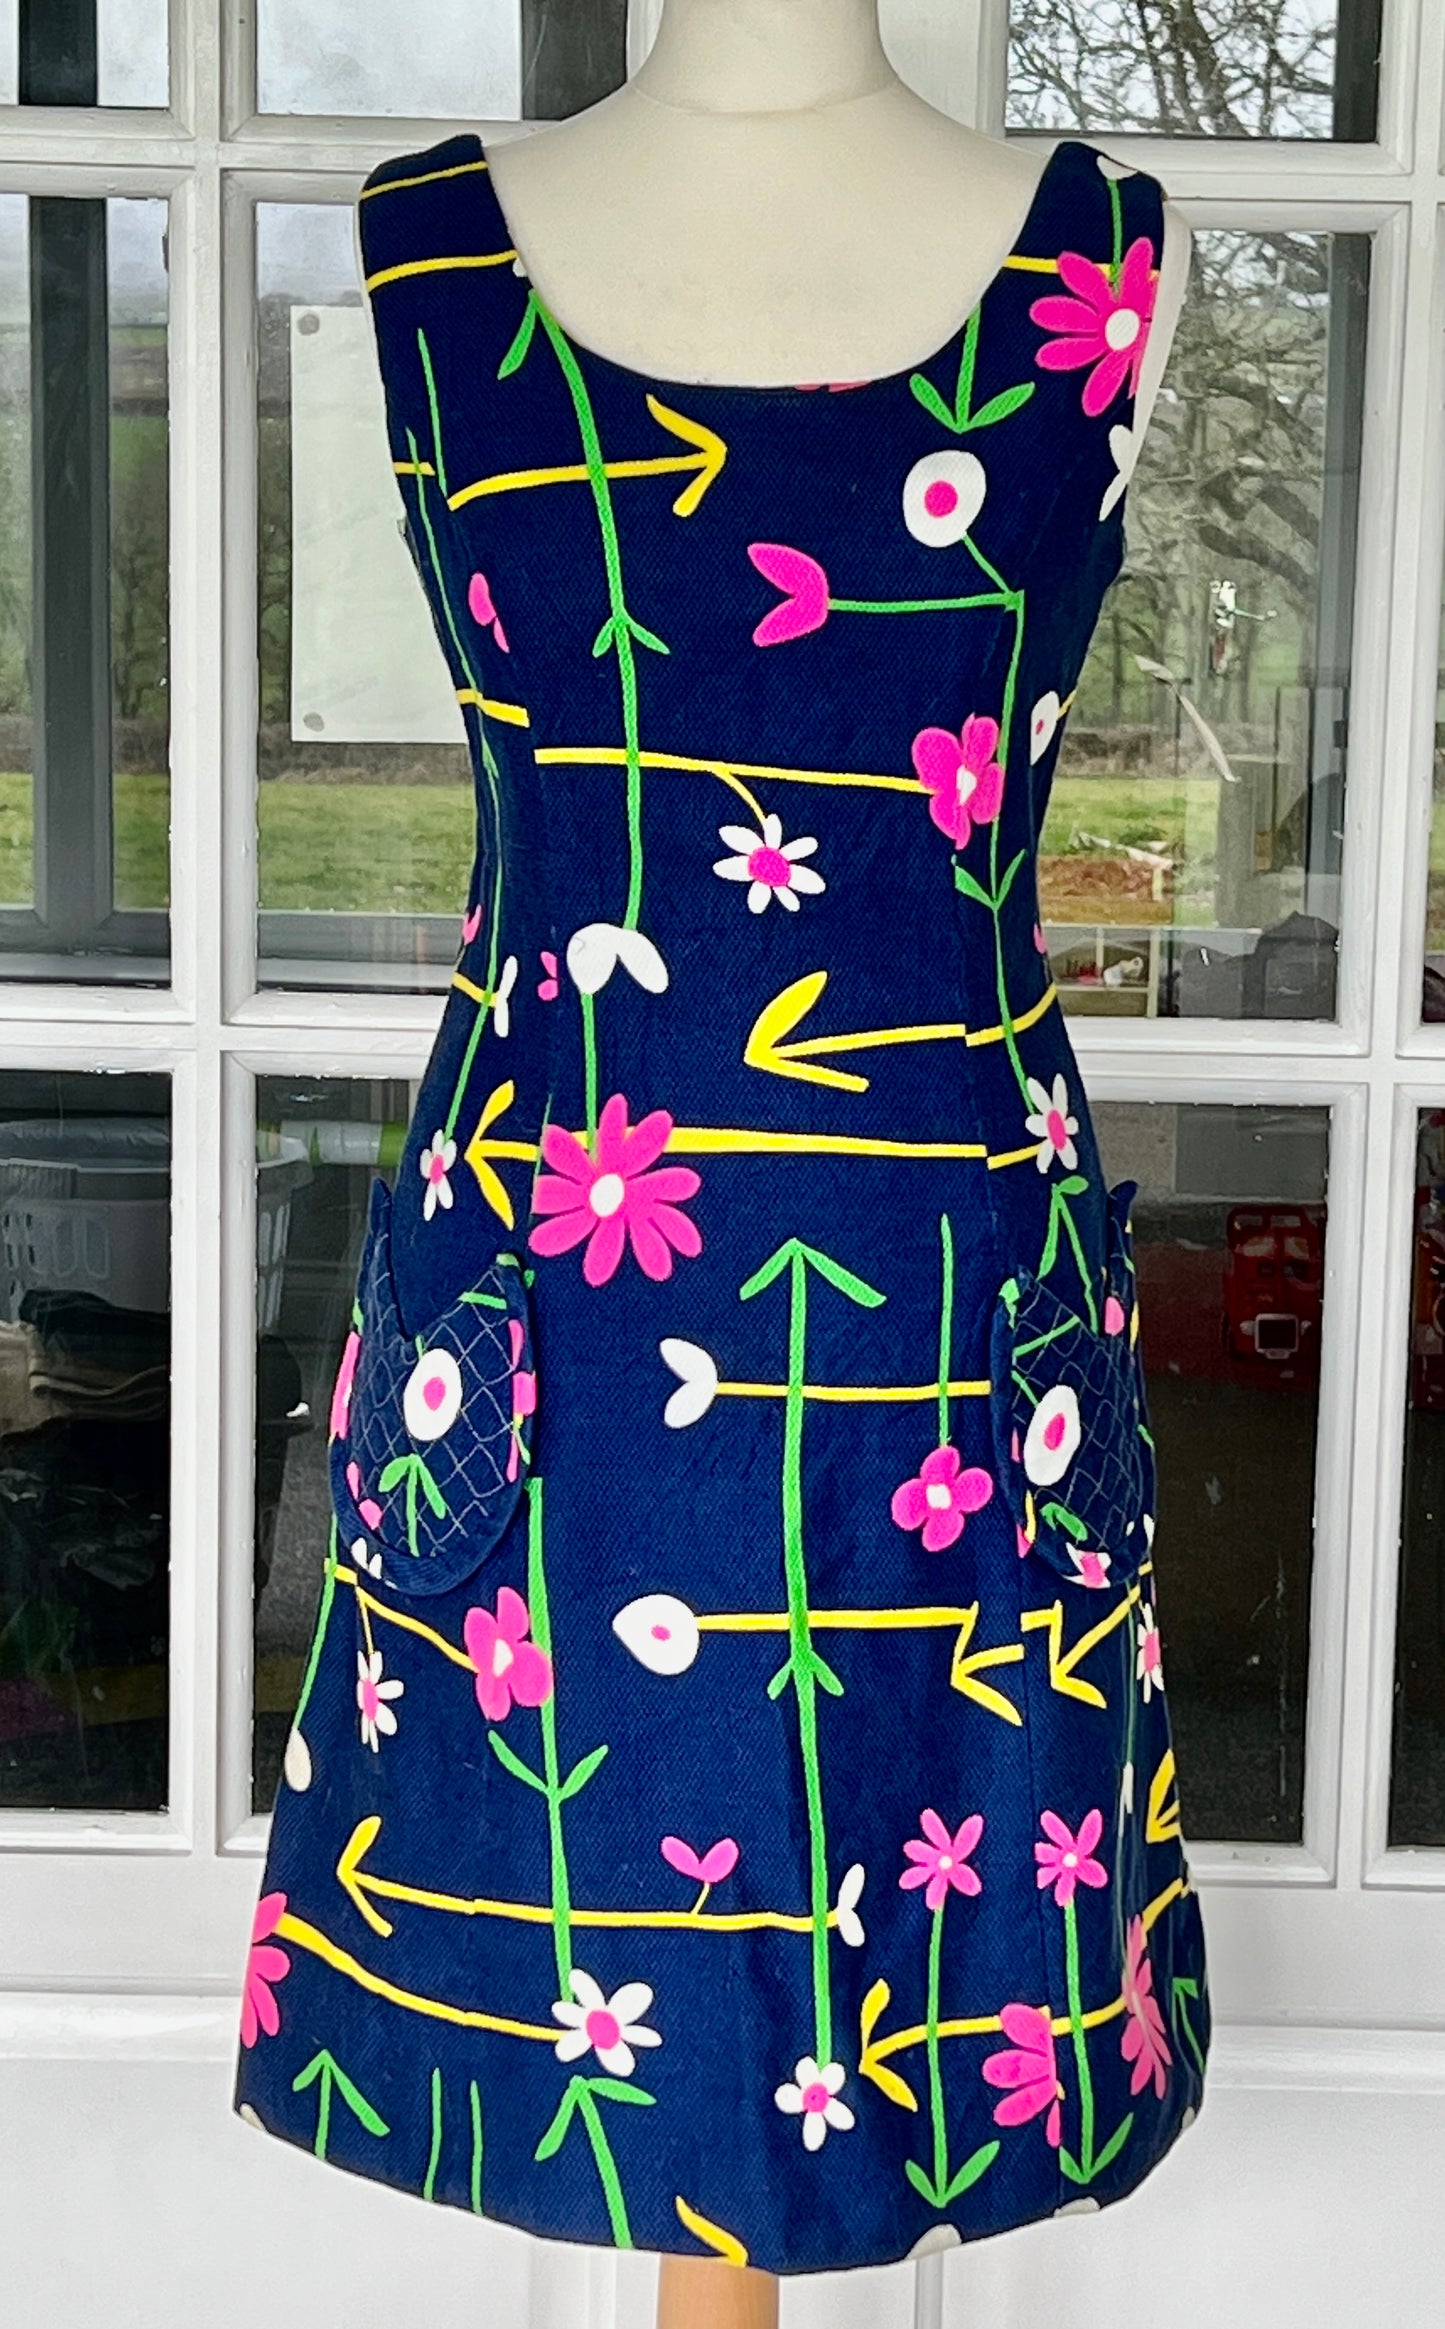 Vintage 1960s floral print blue mini dress with heart shaped pockets S/M